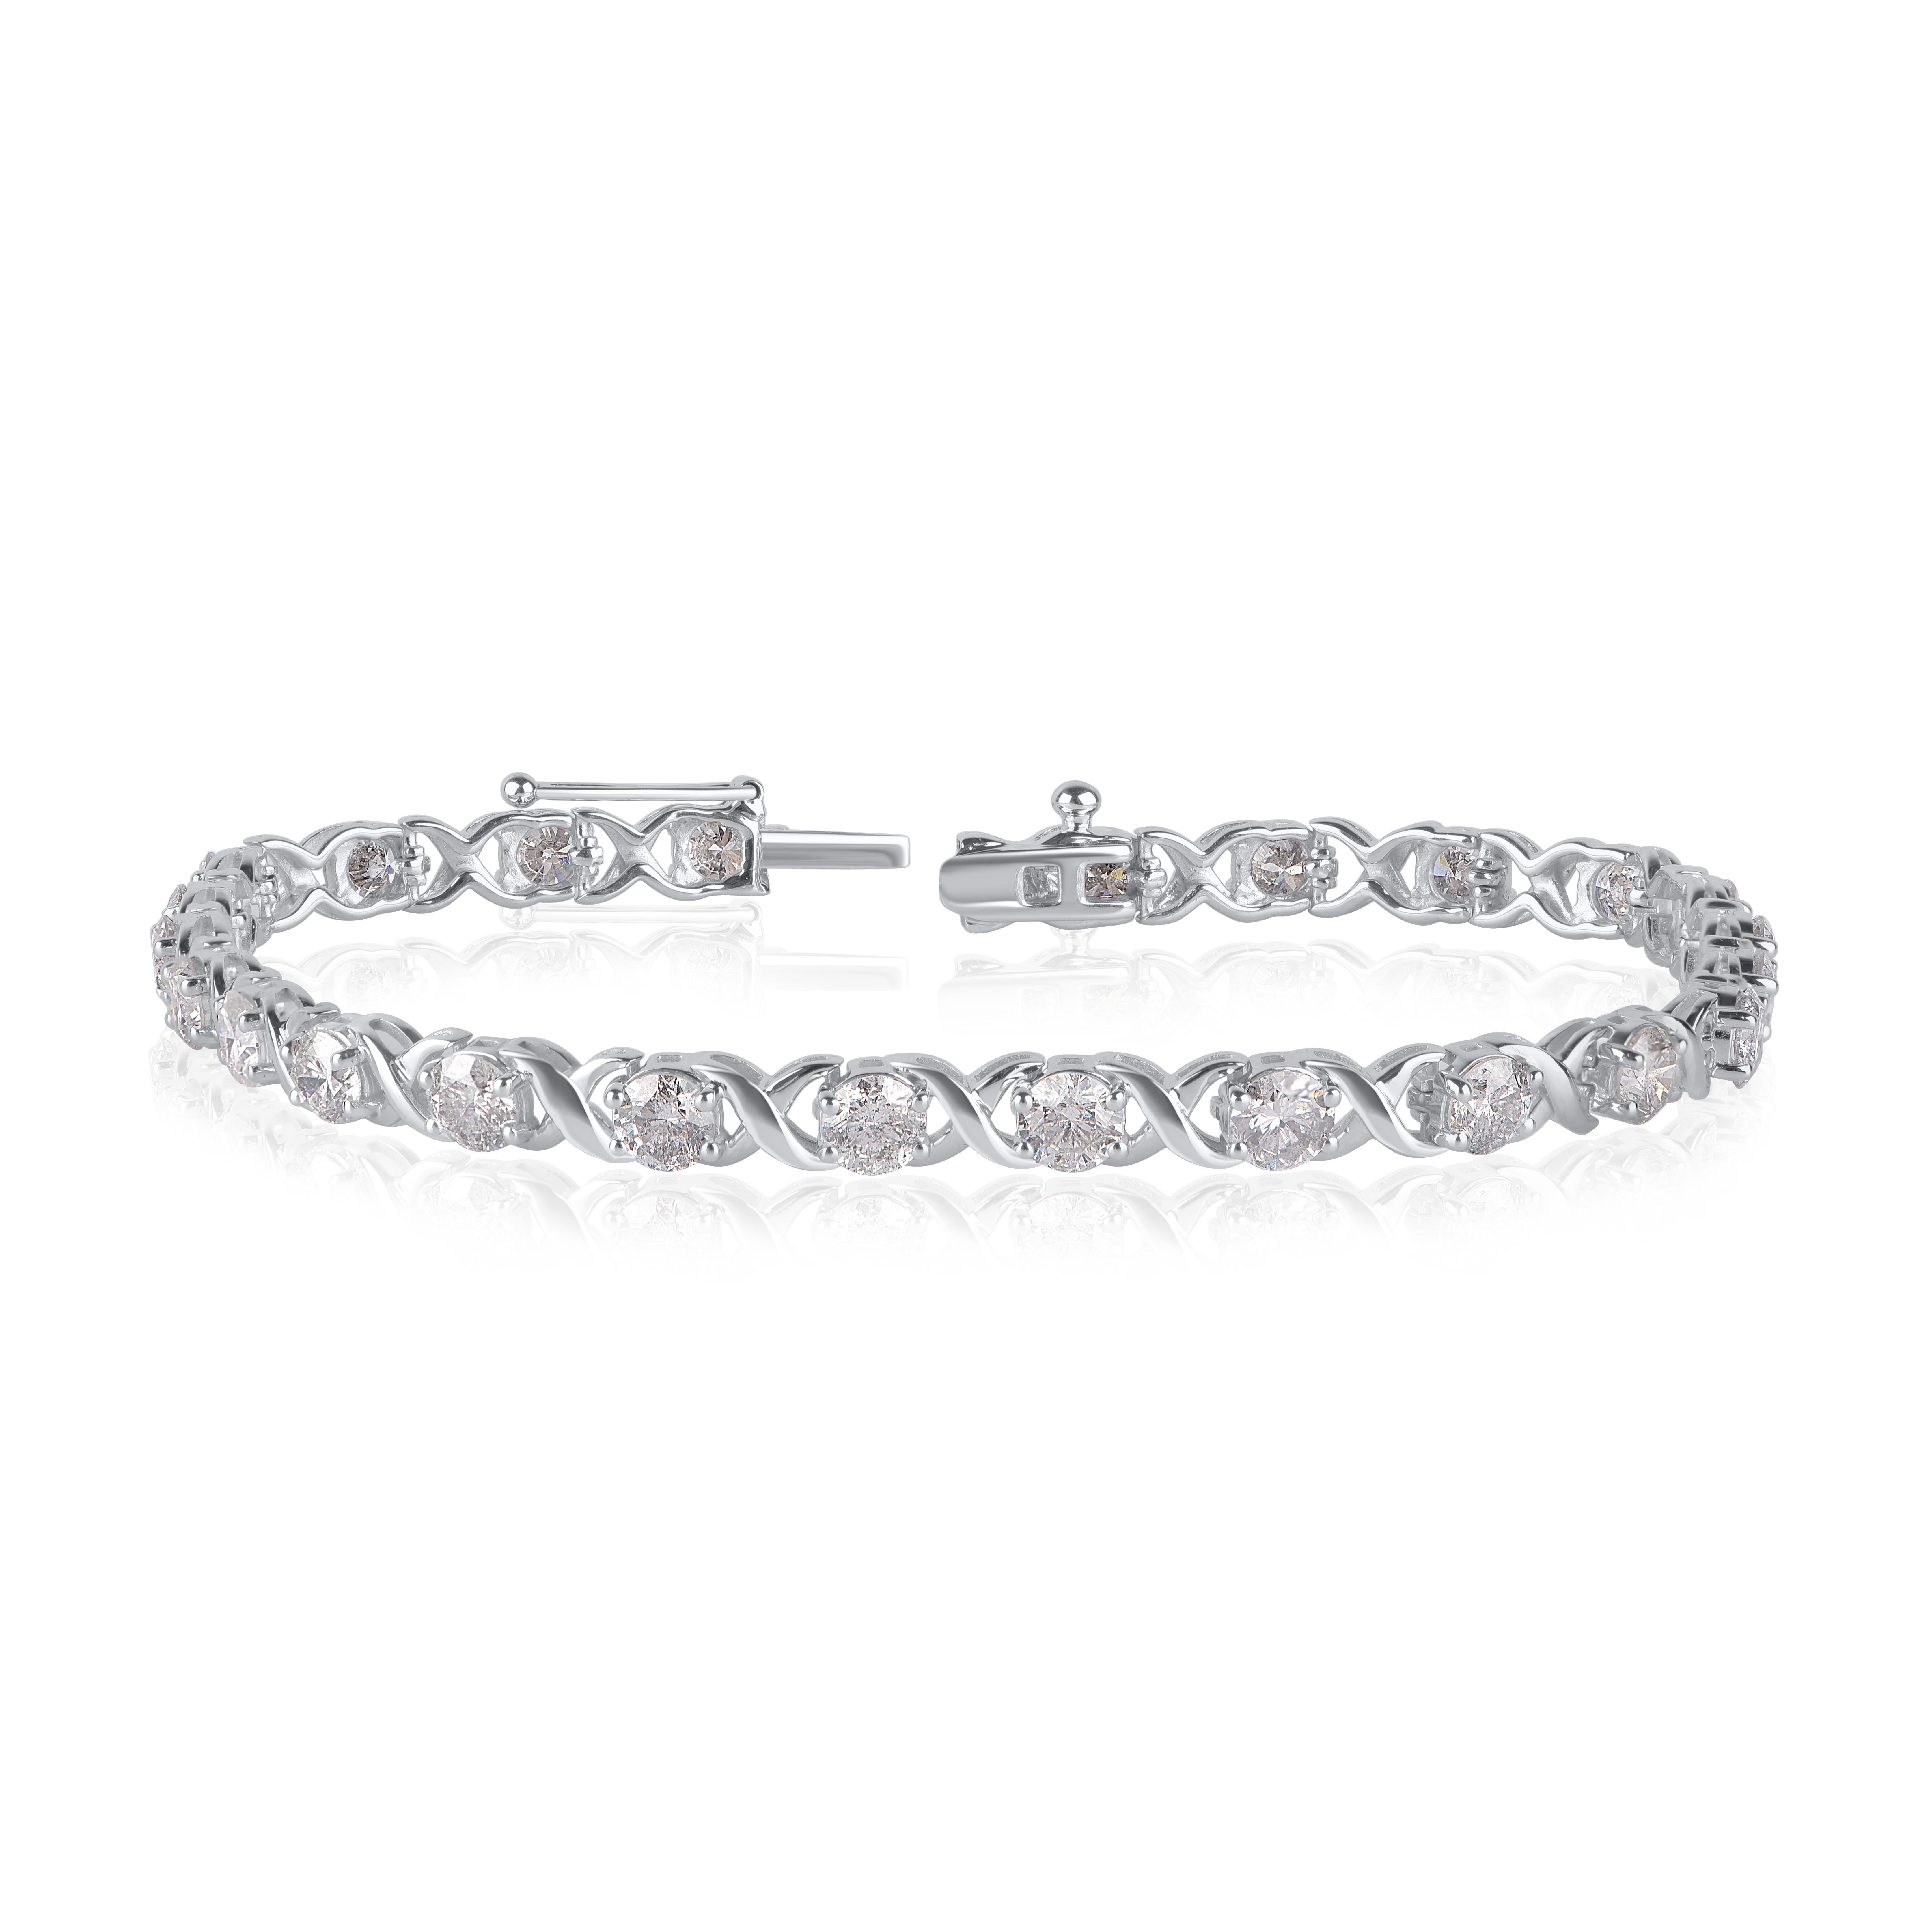 This diamond tennis bracelet has a smart and stylish look. It is crafted in 10 kt white gold and shines brightly with 24 round-cut diamonds embedded elegantly in prong setting. The diamonds are graded H-I Color, I1-I2 Clarity and this diamond tennis